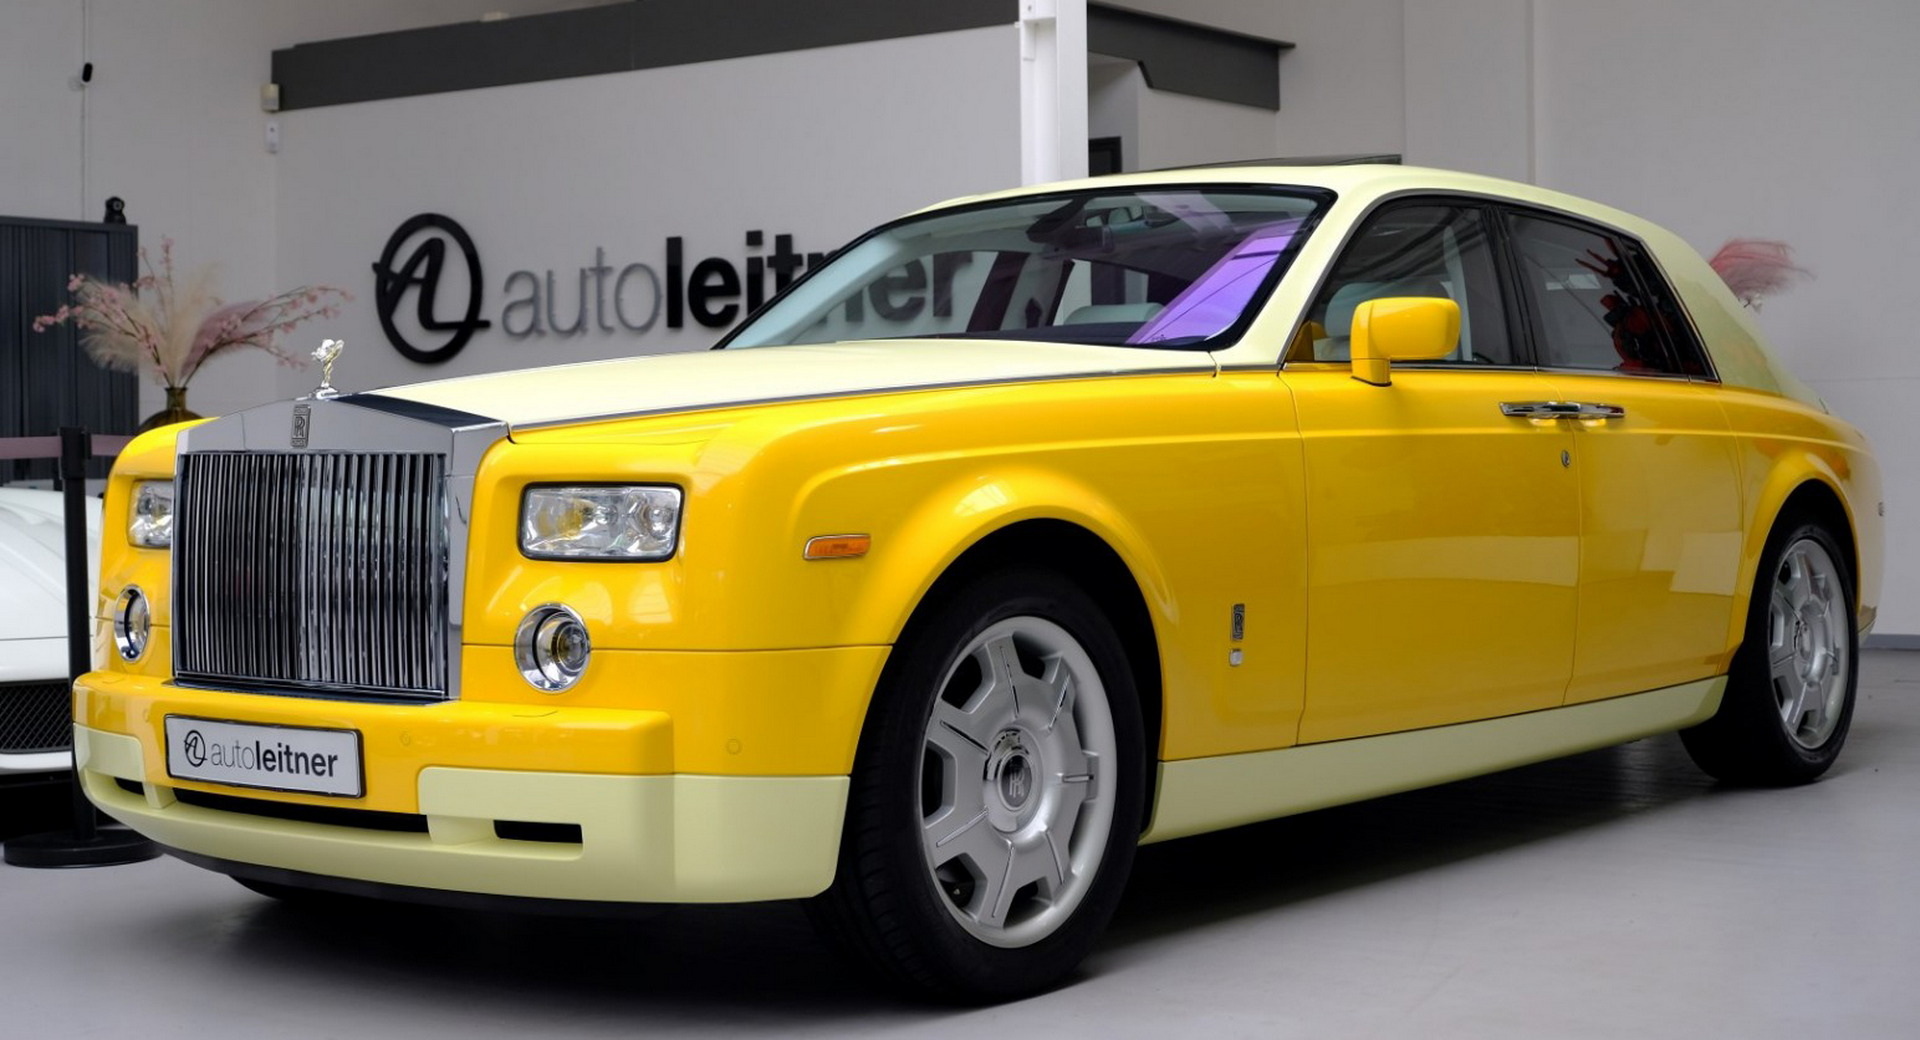 What Makes the All-New Rolls-Royce Phantom Worth $628,000